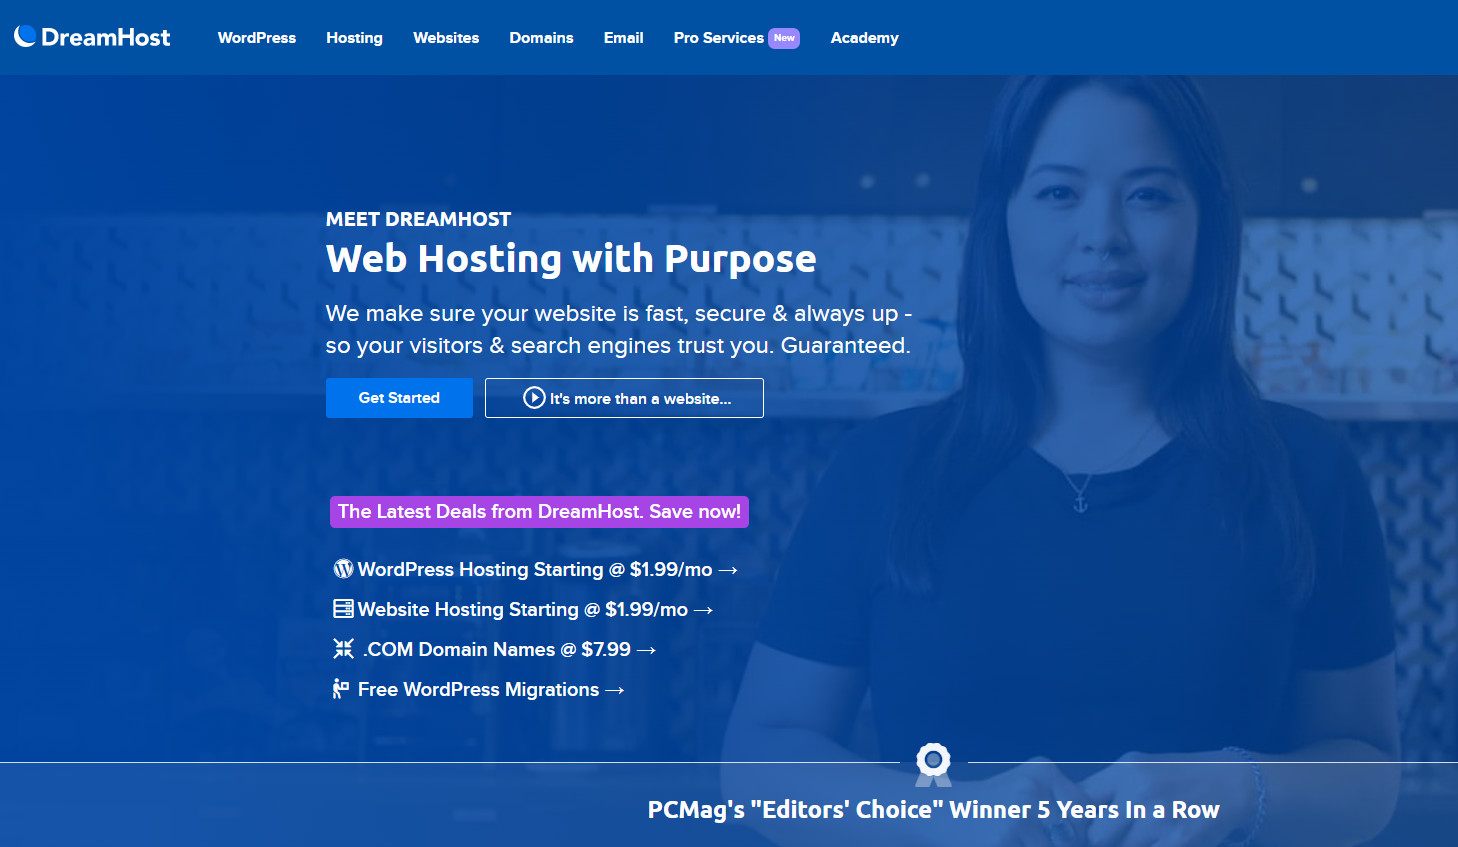 DreamHost sign up page